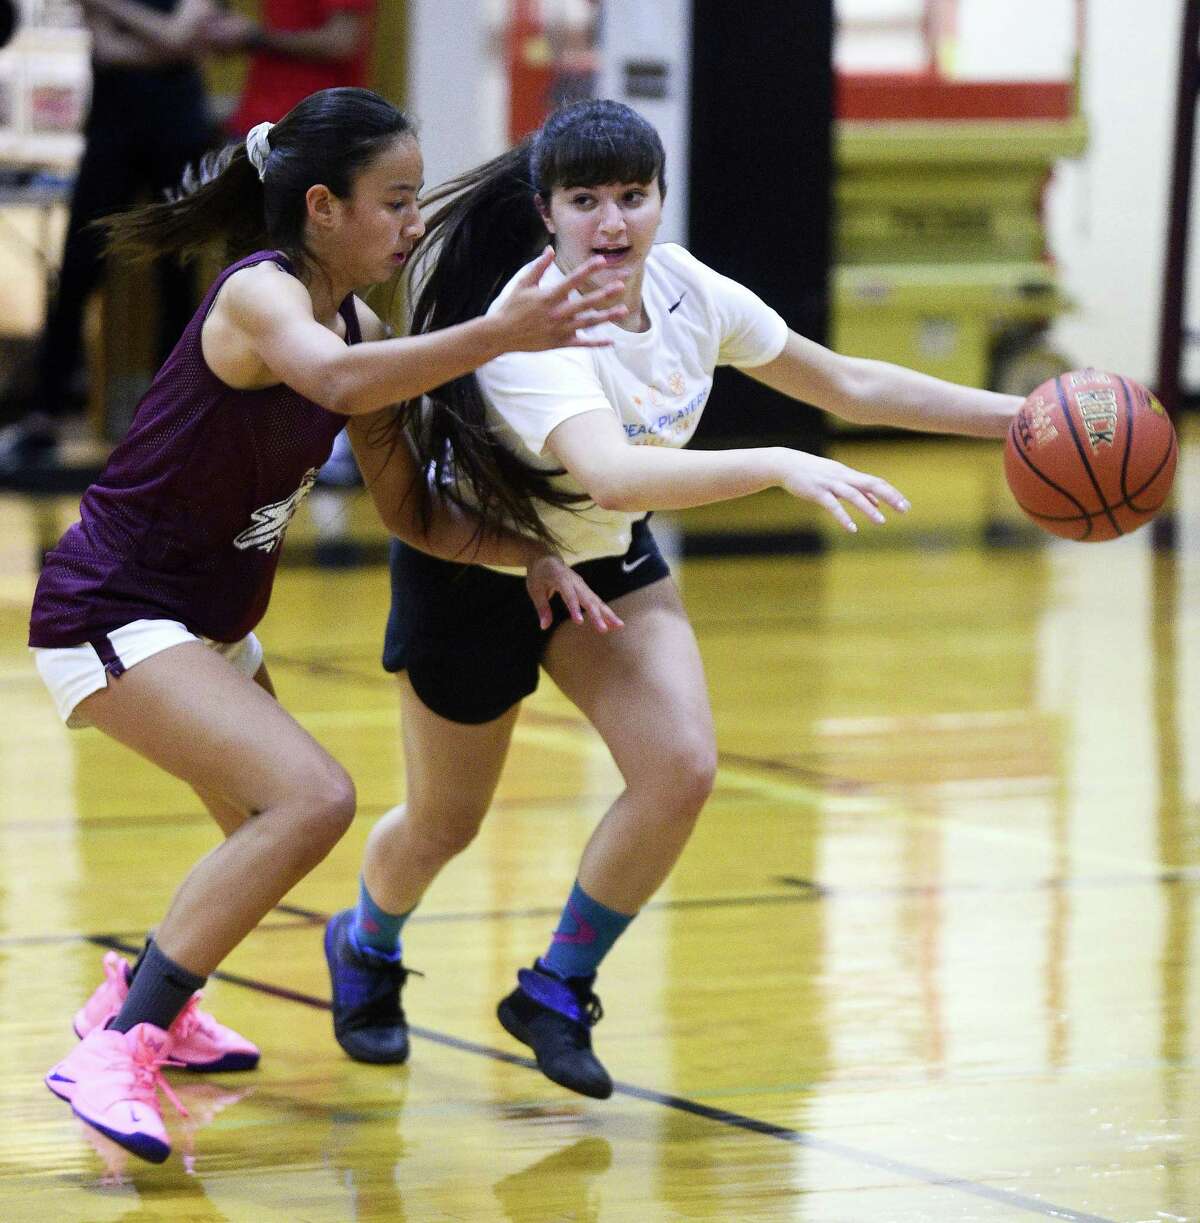 St. Luke's Caroline Lau defends the drive of Jenan Maharmeh of the PeacePlayers-Middle East All Stars during a Goodwill basketball game on Wednesday, Sept. 26, 2018 in New Canaan, Connecticut. A group of Arab and Israeli girls who have grown up playing basketball together in the PeacePlayers Middle East program, have been touring the United States promoting Peace and Goodwill.